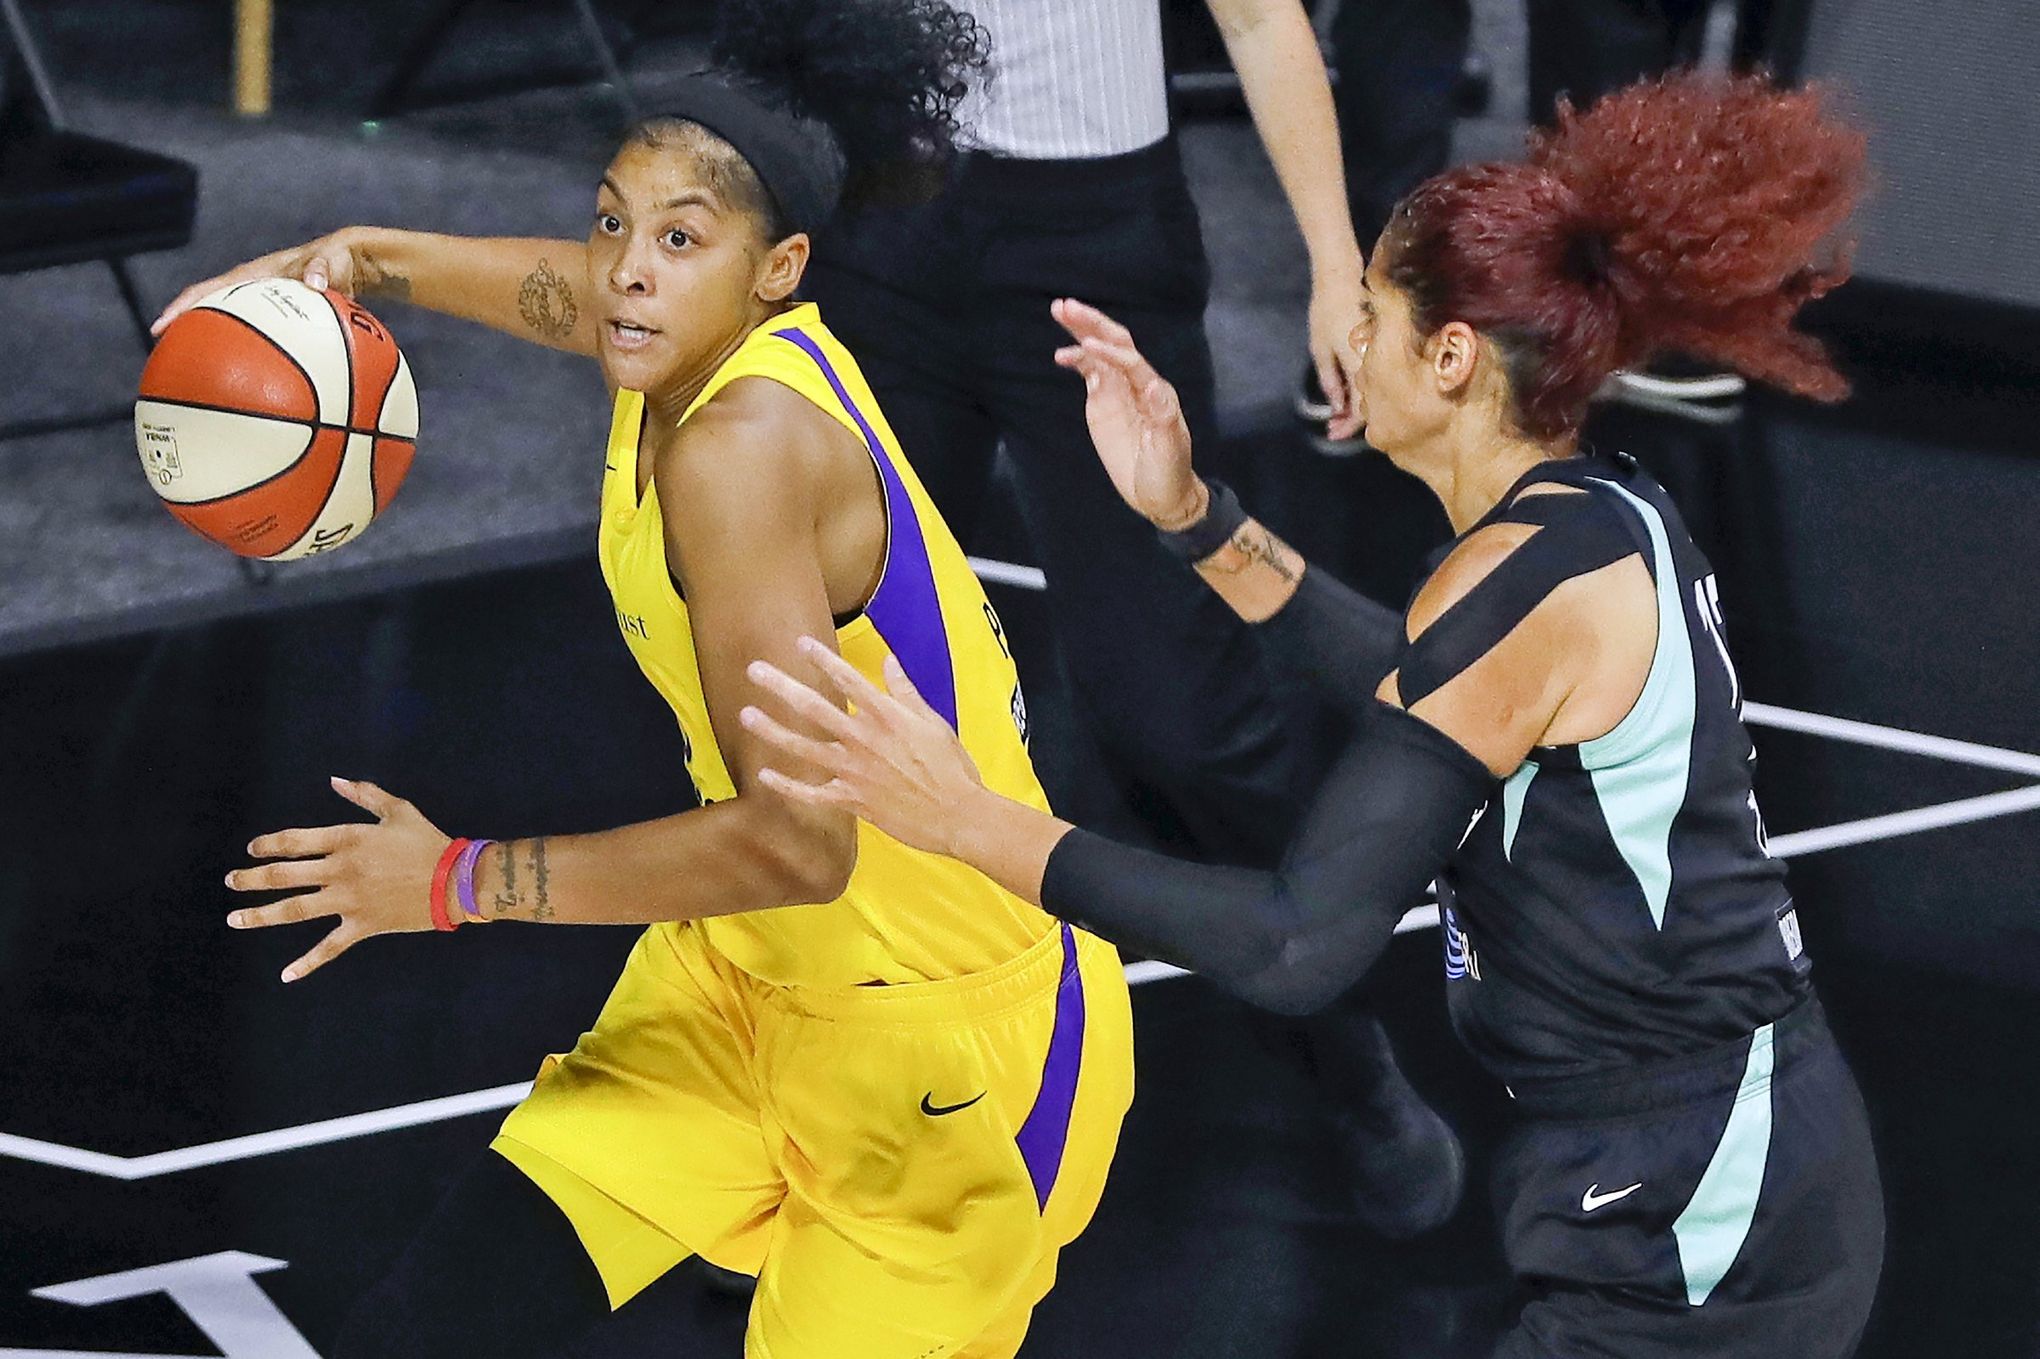 Candace Parker agrees to sign with Chicago Sky, per report